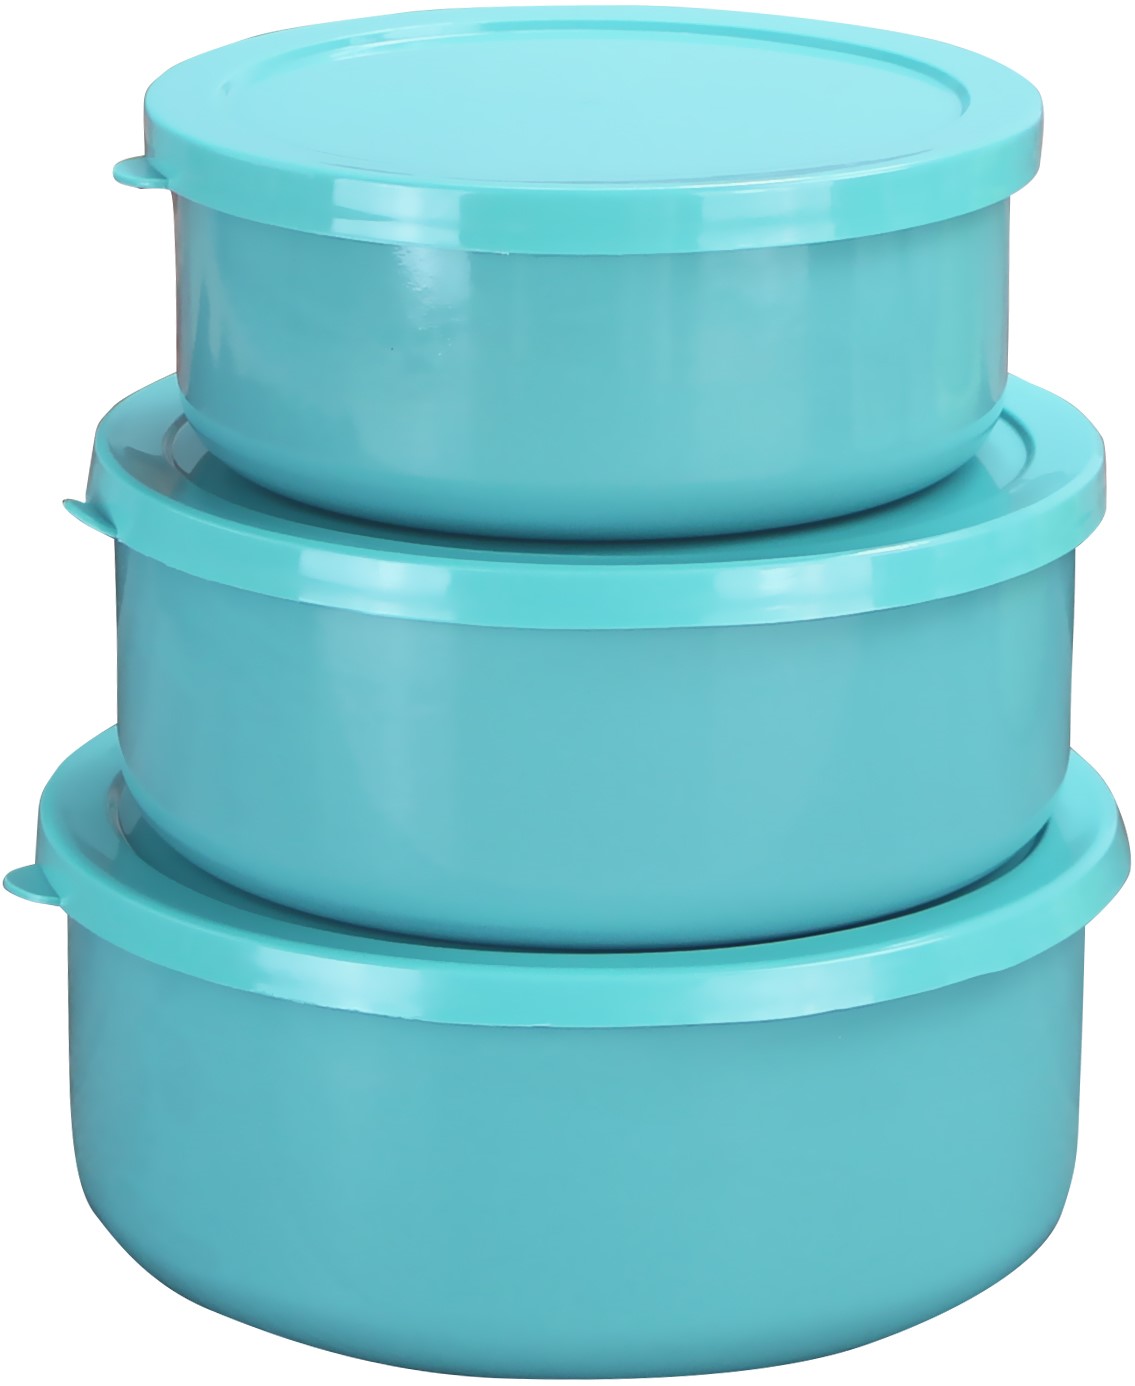 04702 Turquoise - 6 Piece - Small Bowl Set